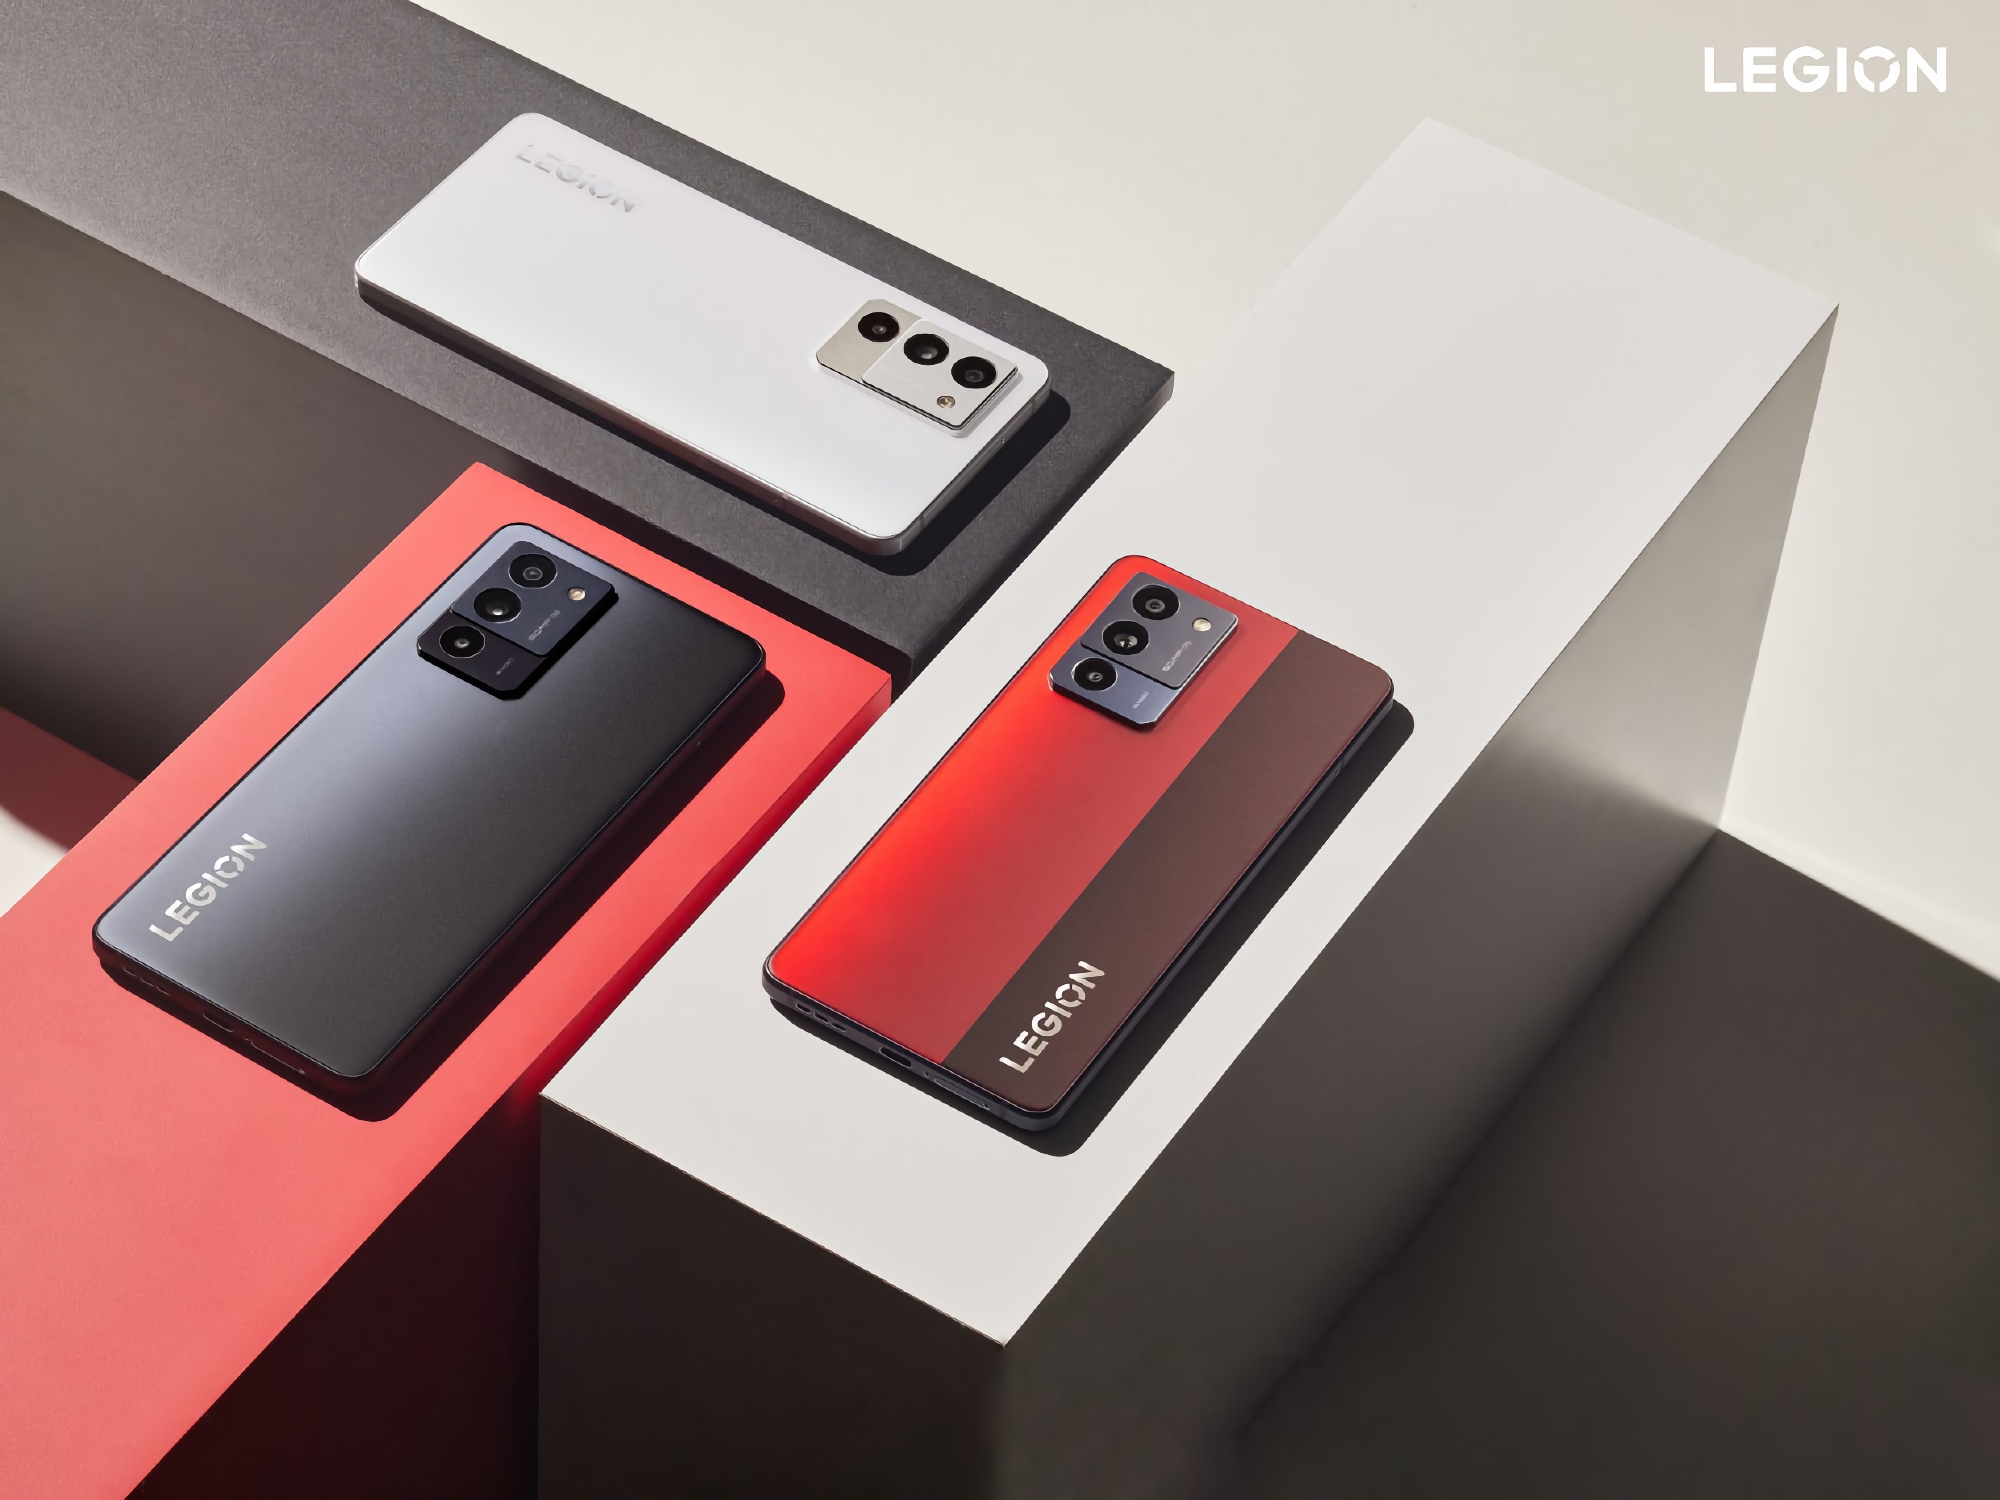 Insider revealed the appearance of Lenovo Legion Y70: gaming smartphone with Snapdragon 8+ Gen1 chip and 5000 mAh battery